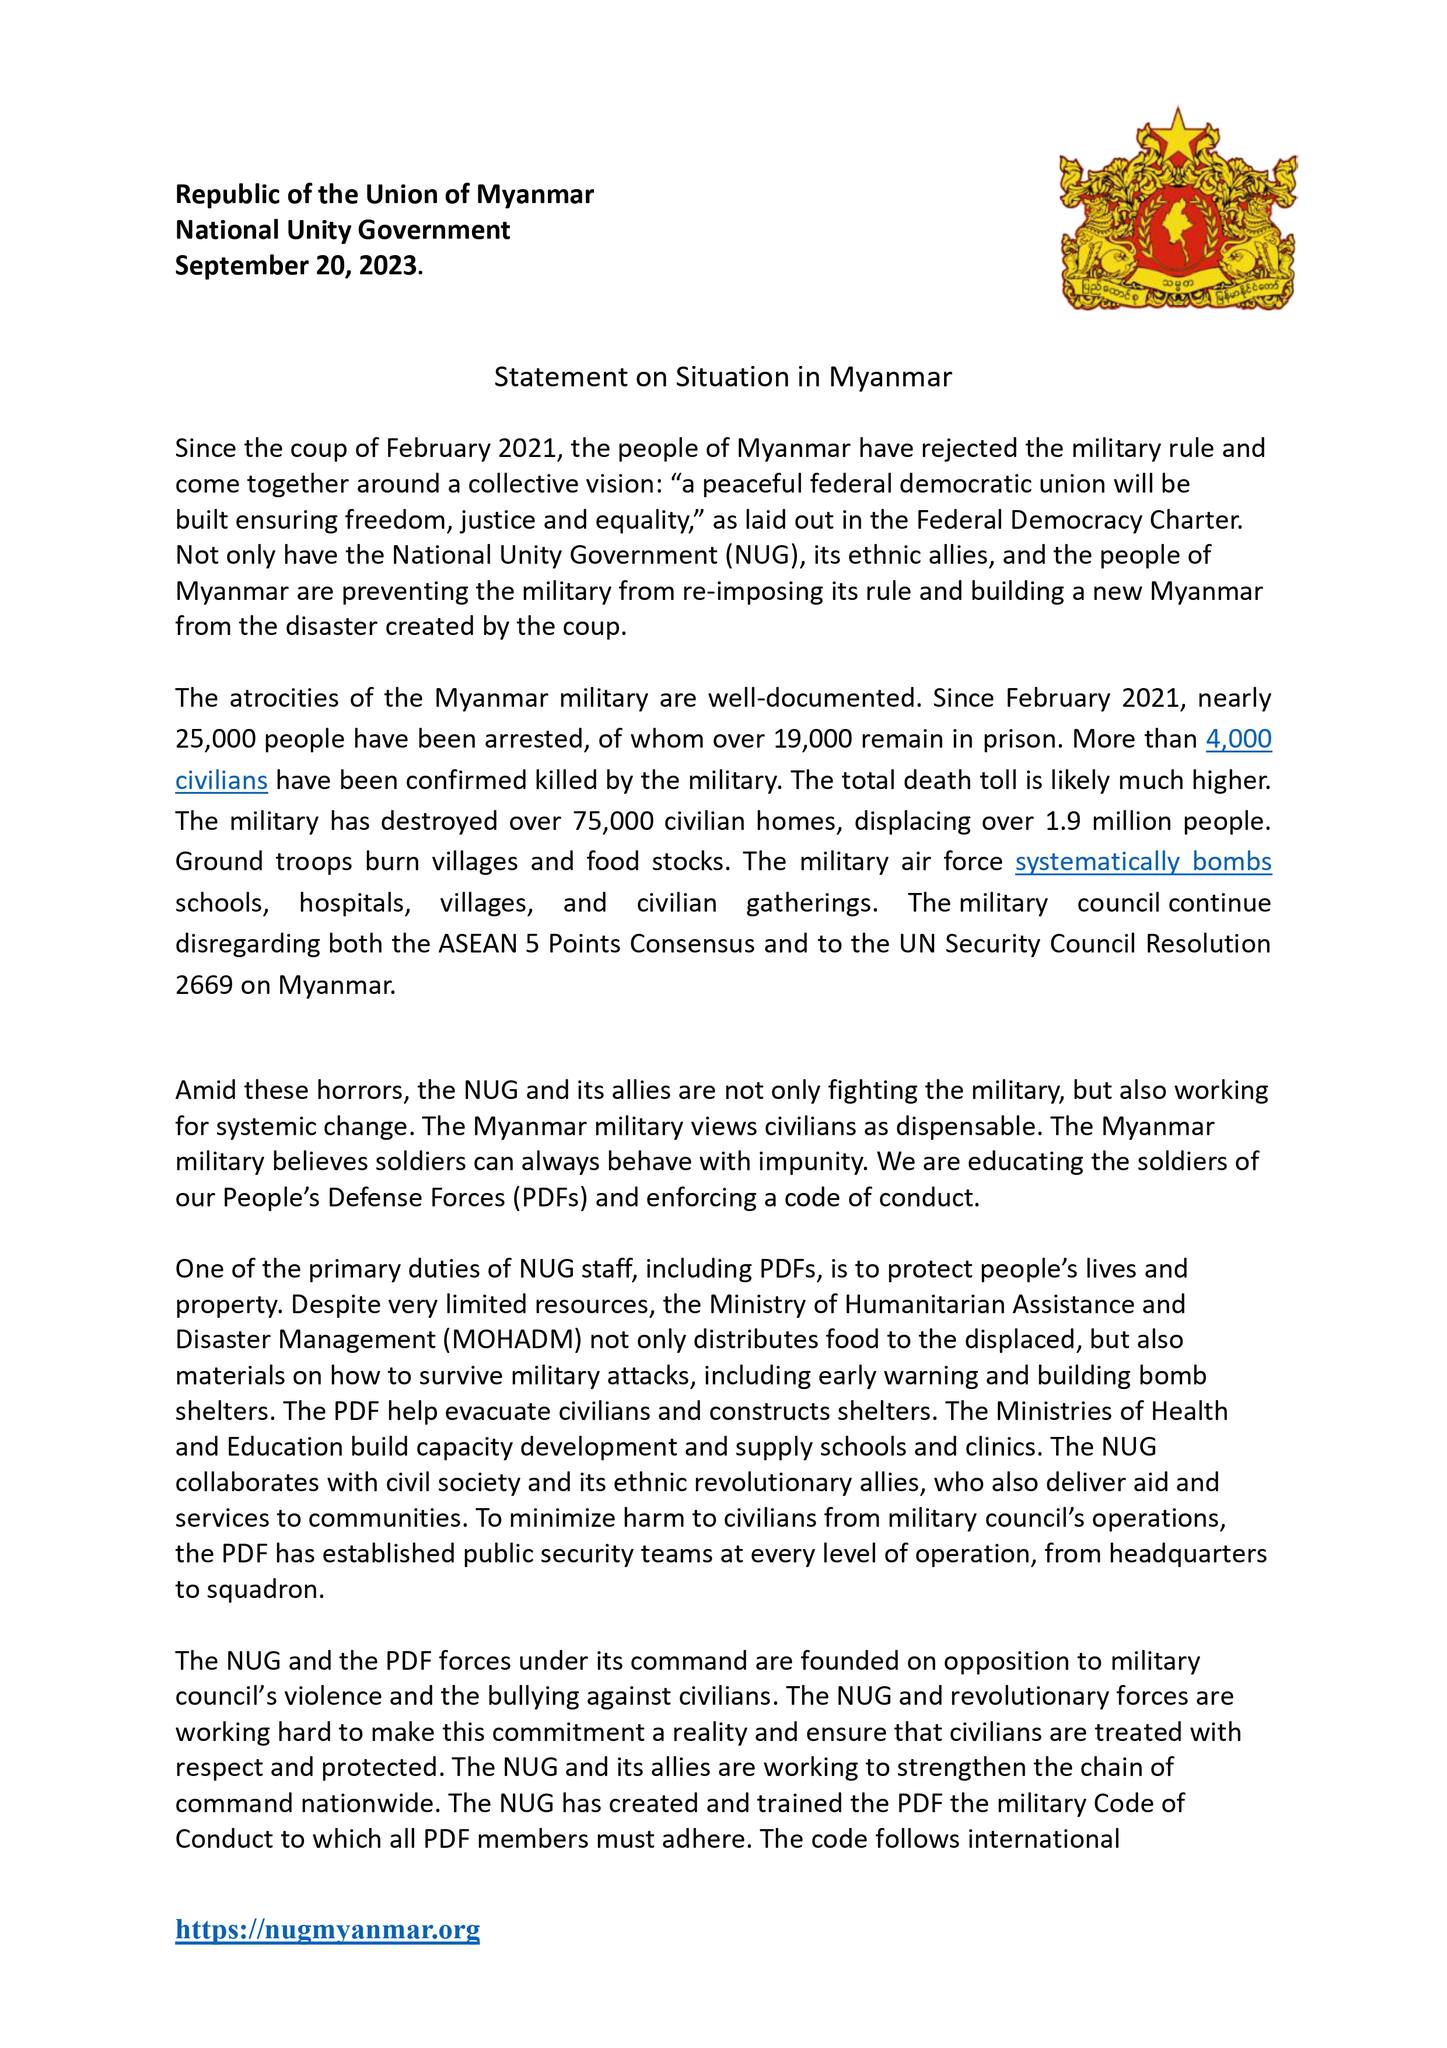 Statement on Situation in Myanmar (September 20, 2023)